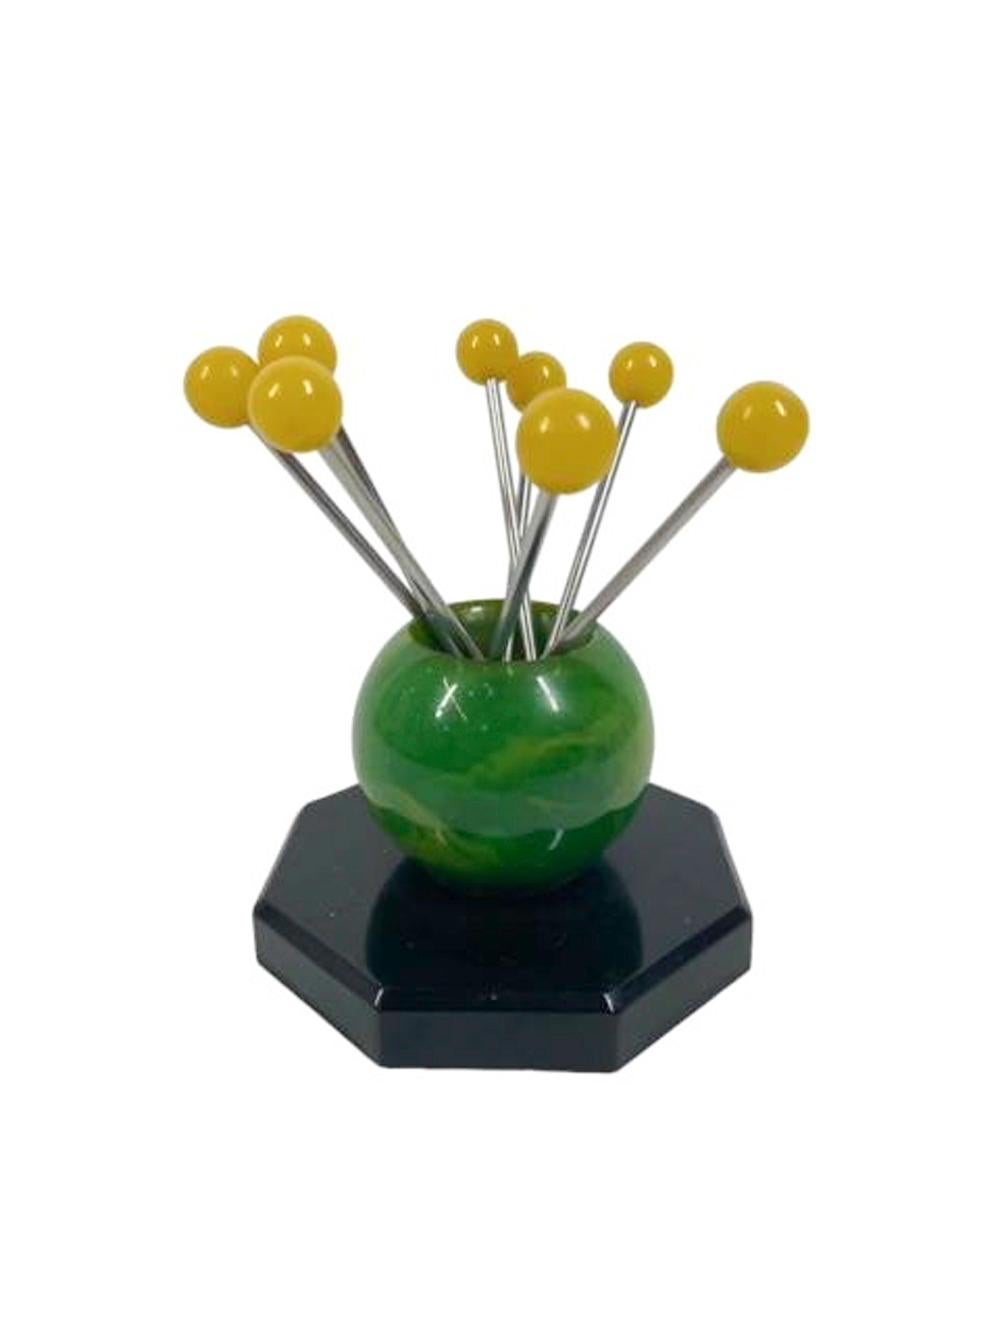 Set of 8 Art Deco chromed cocktail picks thit forked tips and yellow ball tops in a green and yellow swirled Bakelite ball shaped stand on an octagonal black Bakelite base.